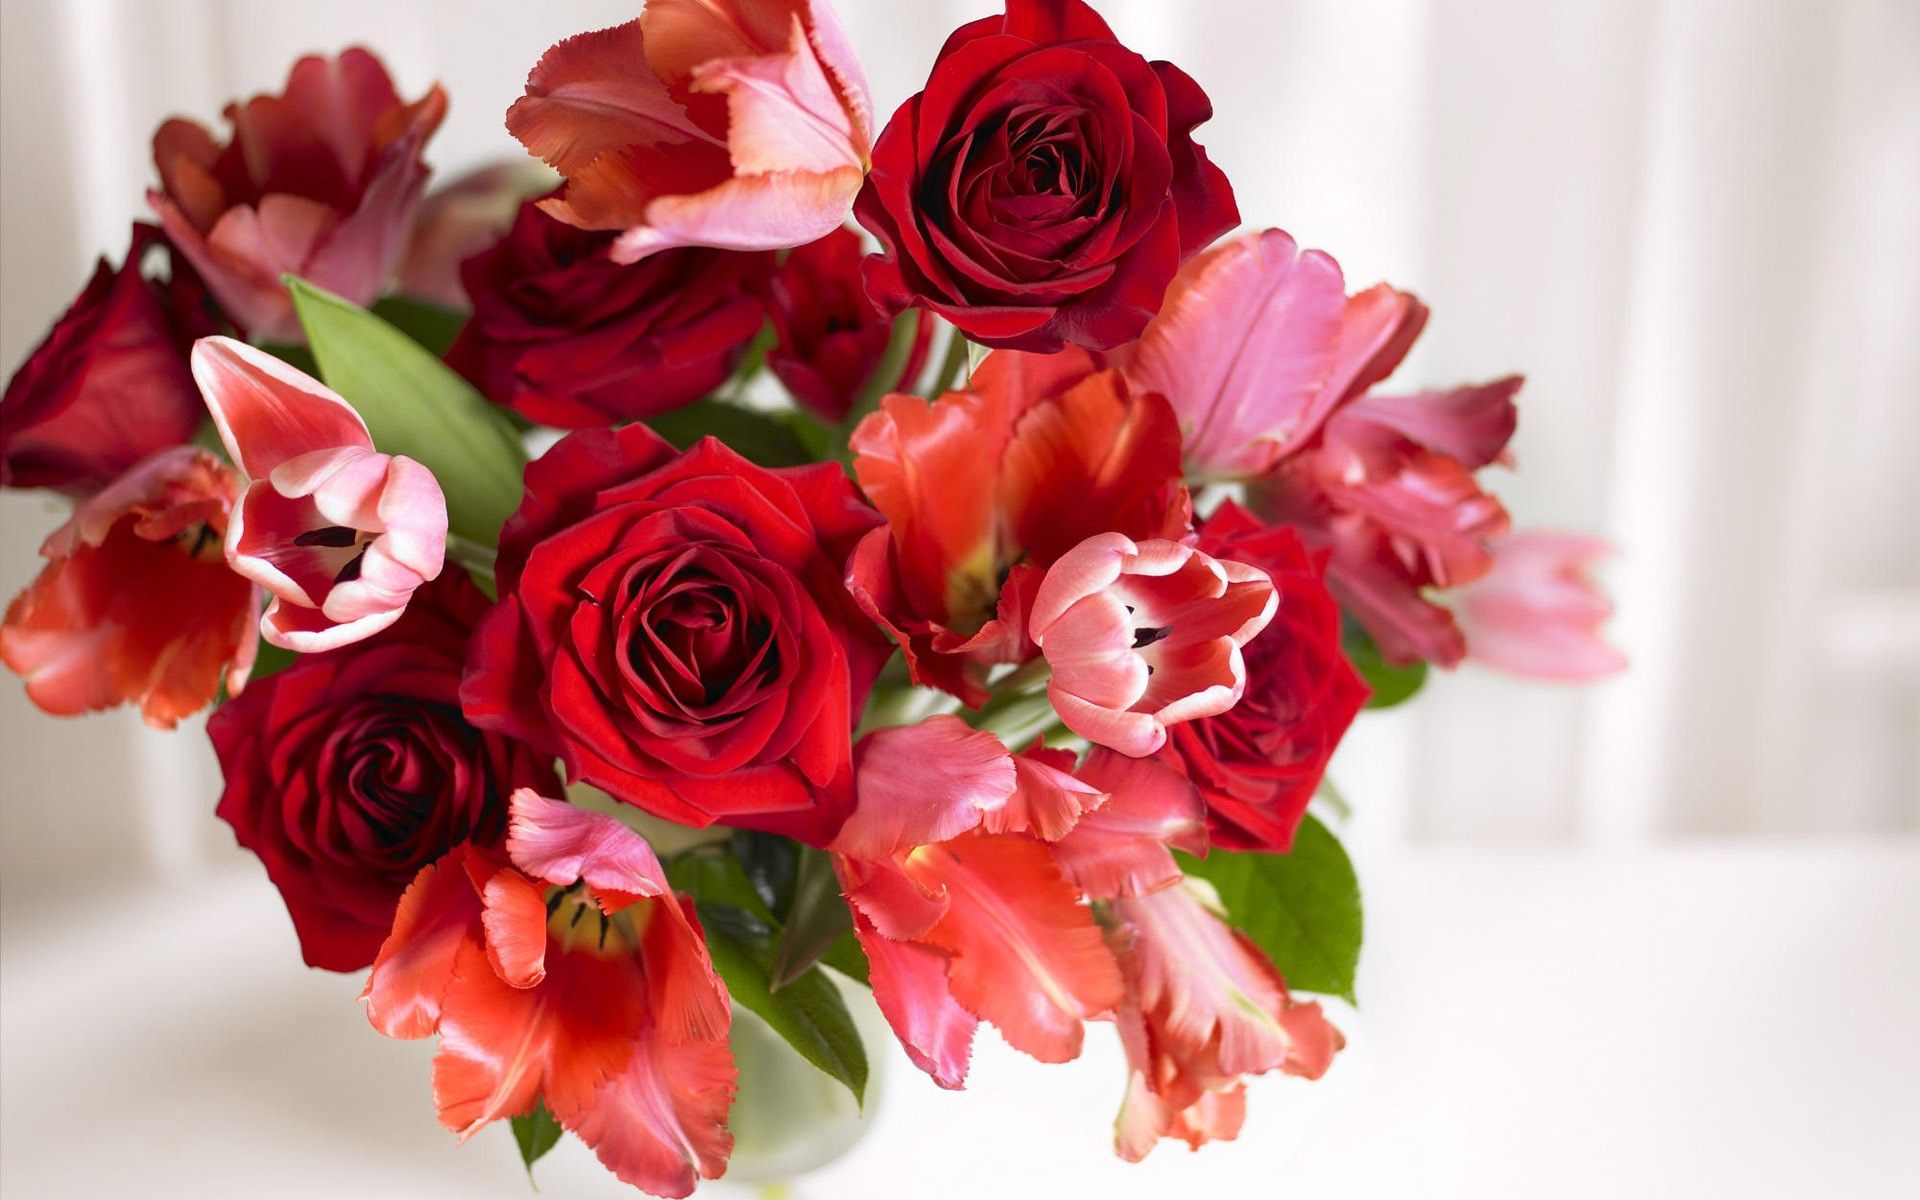 558983753, A Bouquet Of Red Roses - Beautiful Red Rose Flowers - HD Wallpaper 